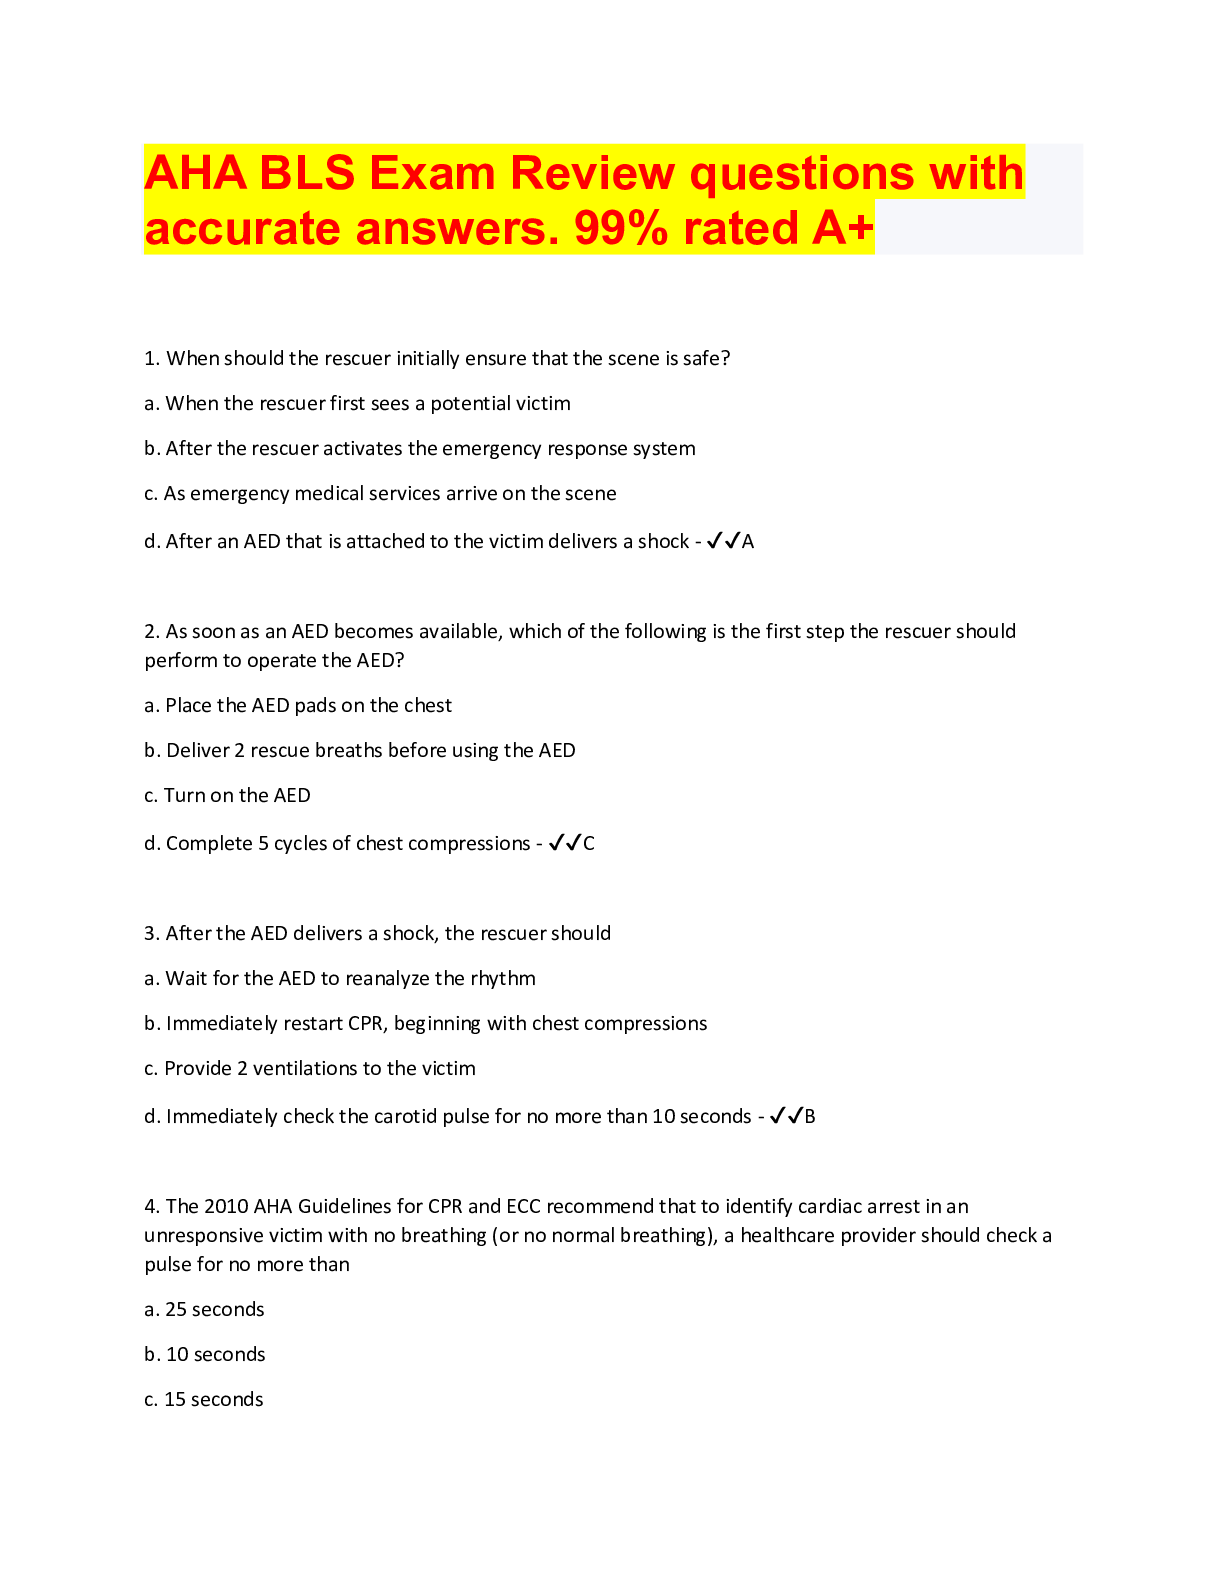 AHA BLS Exam Review questions with accurate answers. 99 rated A+